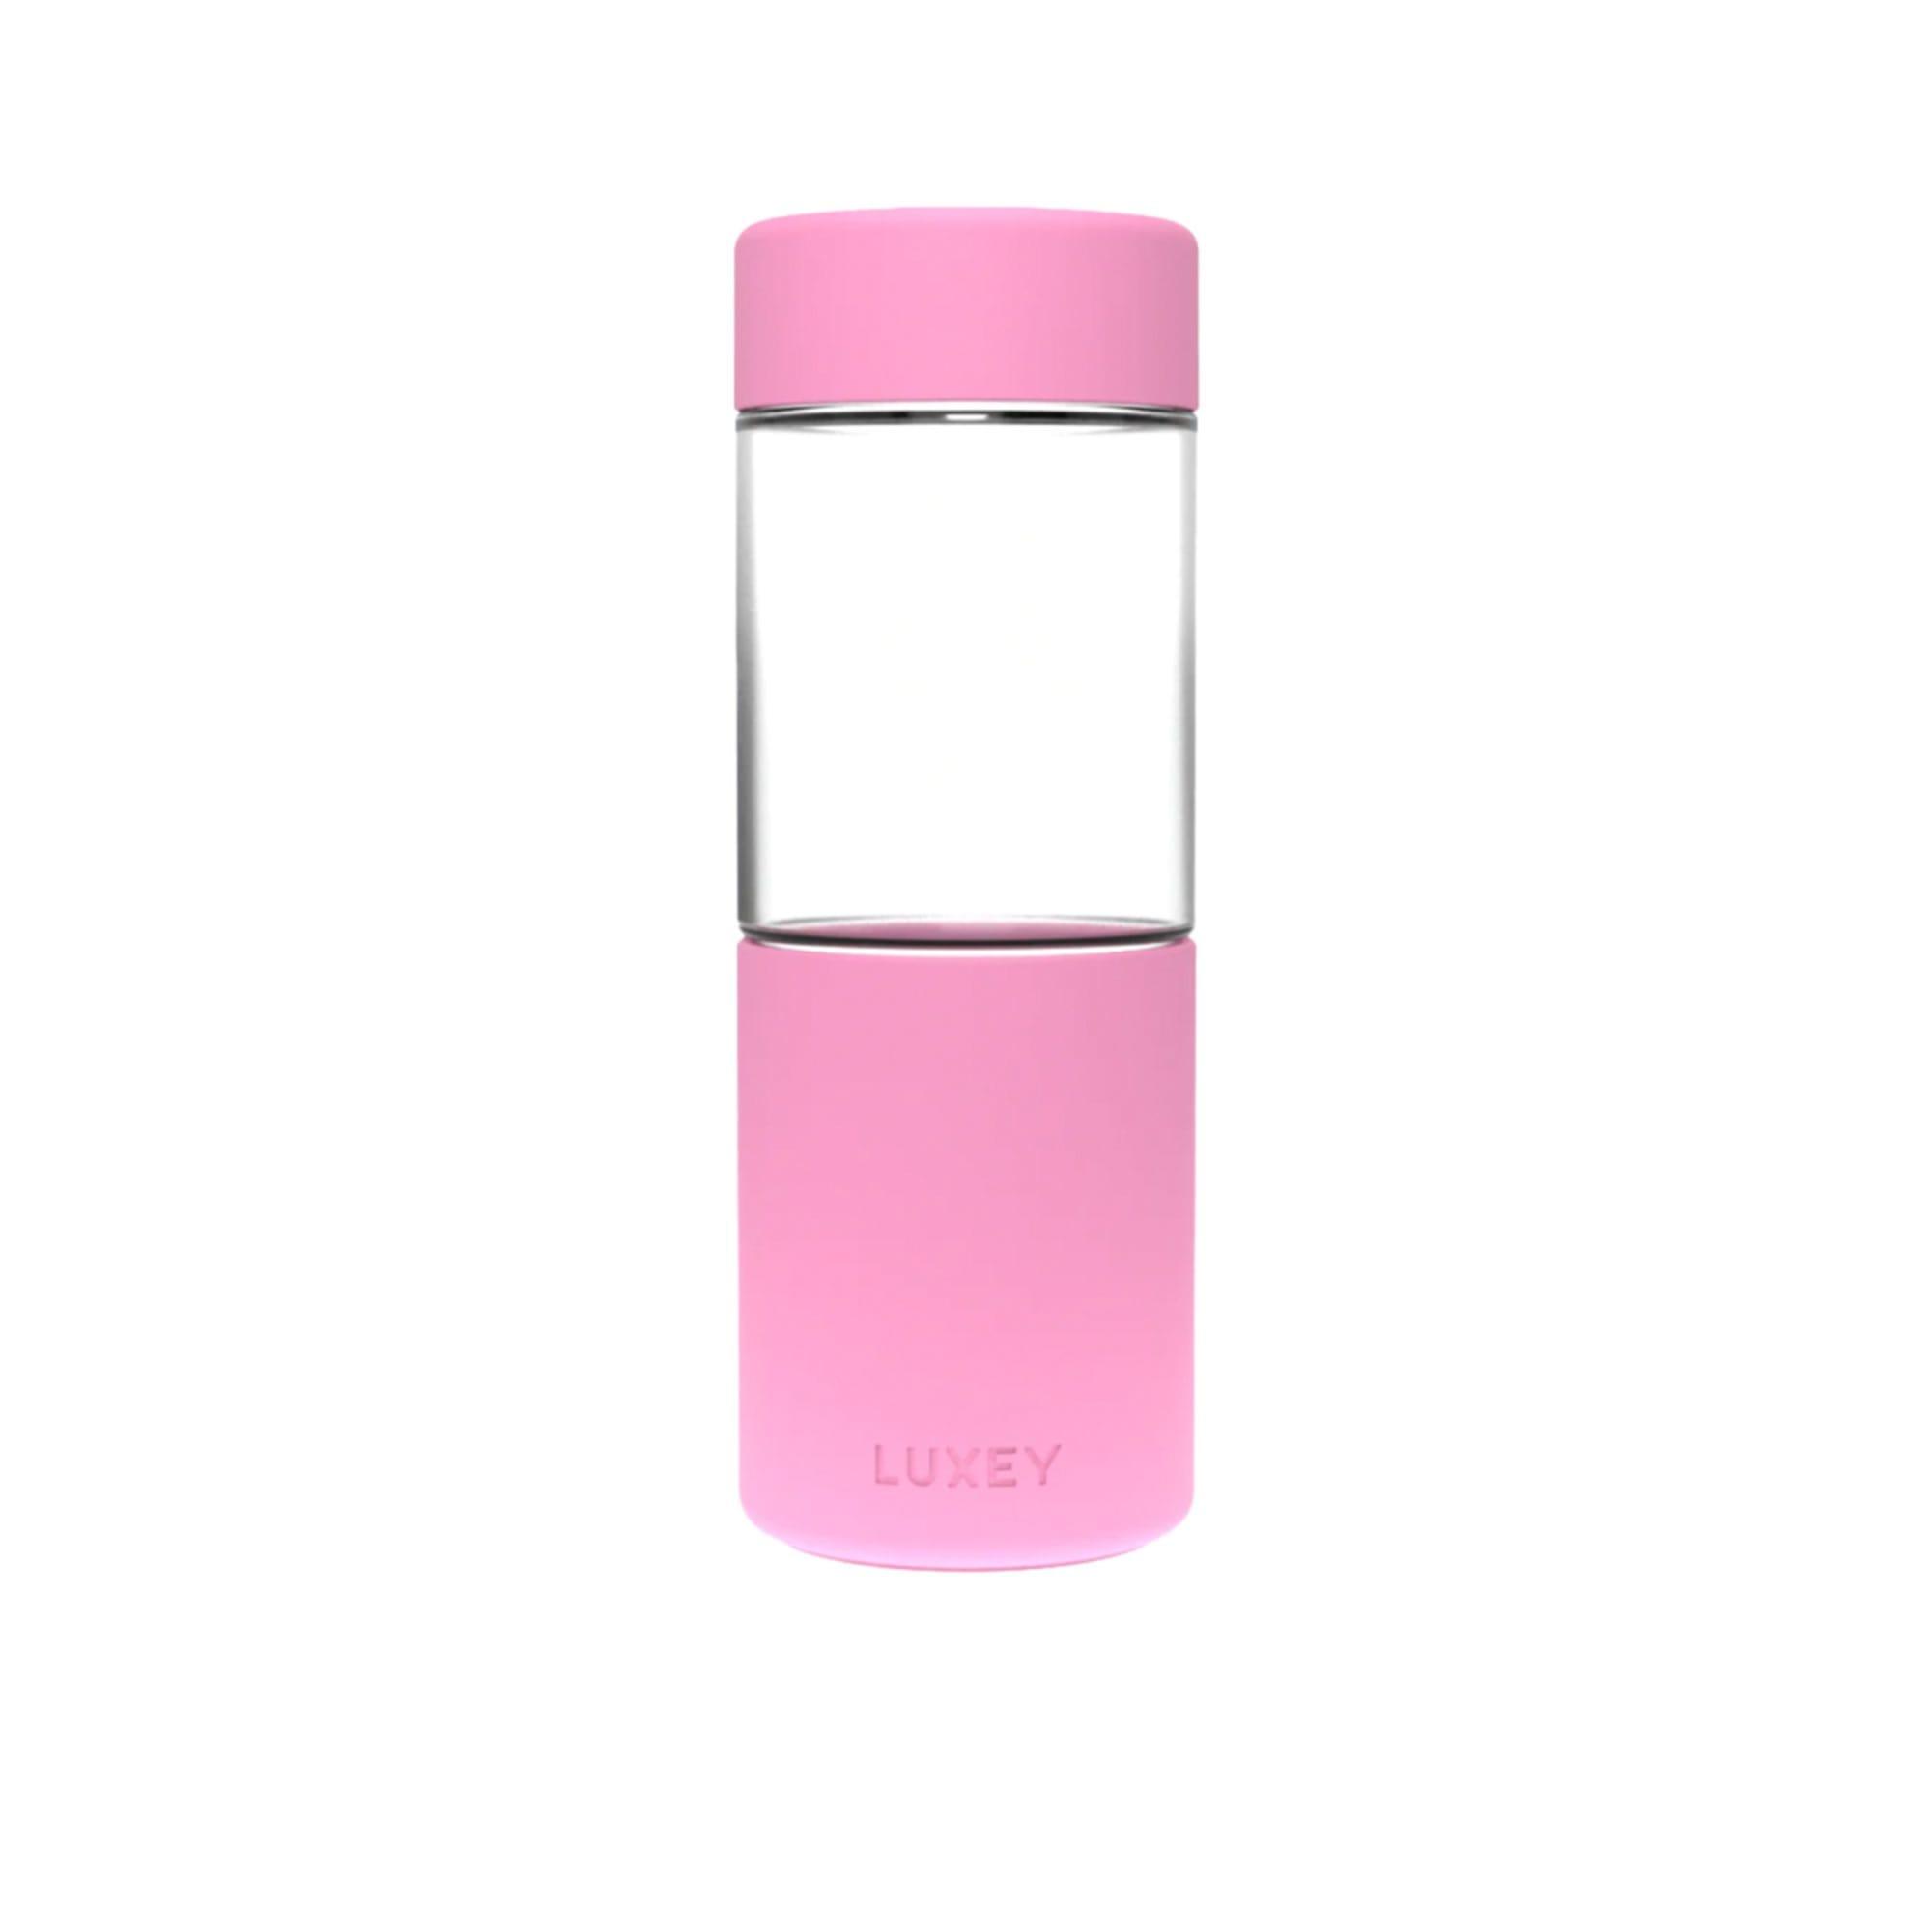 Luxey Cup Glass Coffee and Smoothie Cup 473ml (16oz) Cheeky Pink Image 1